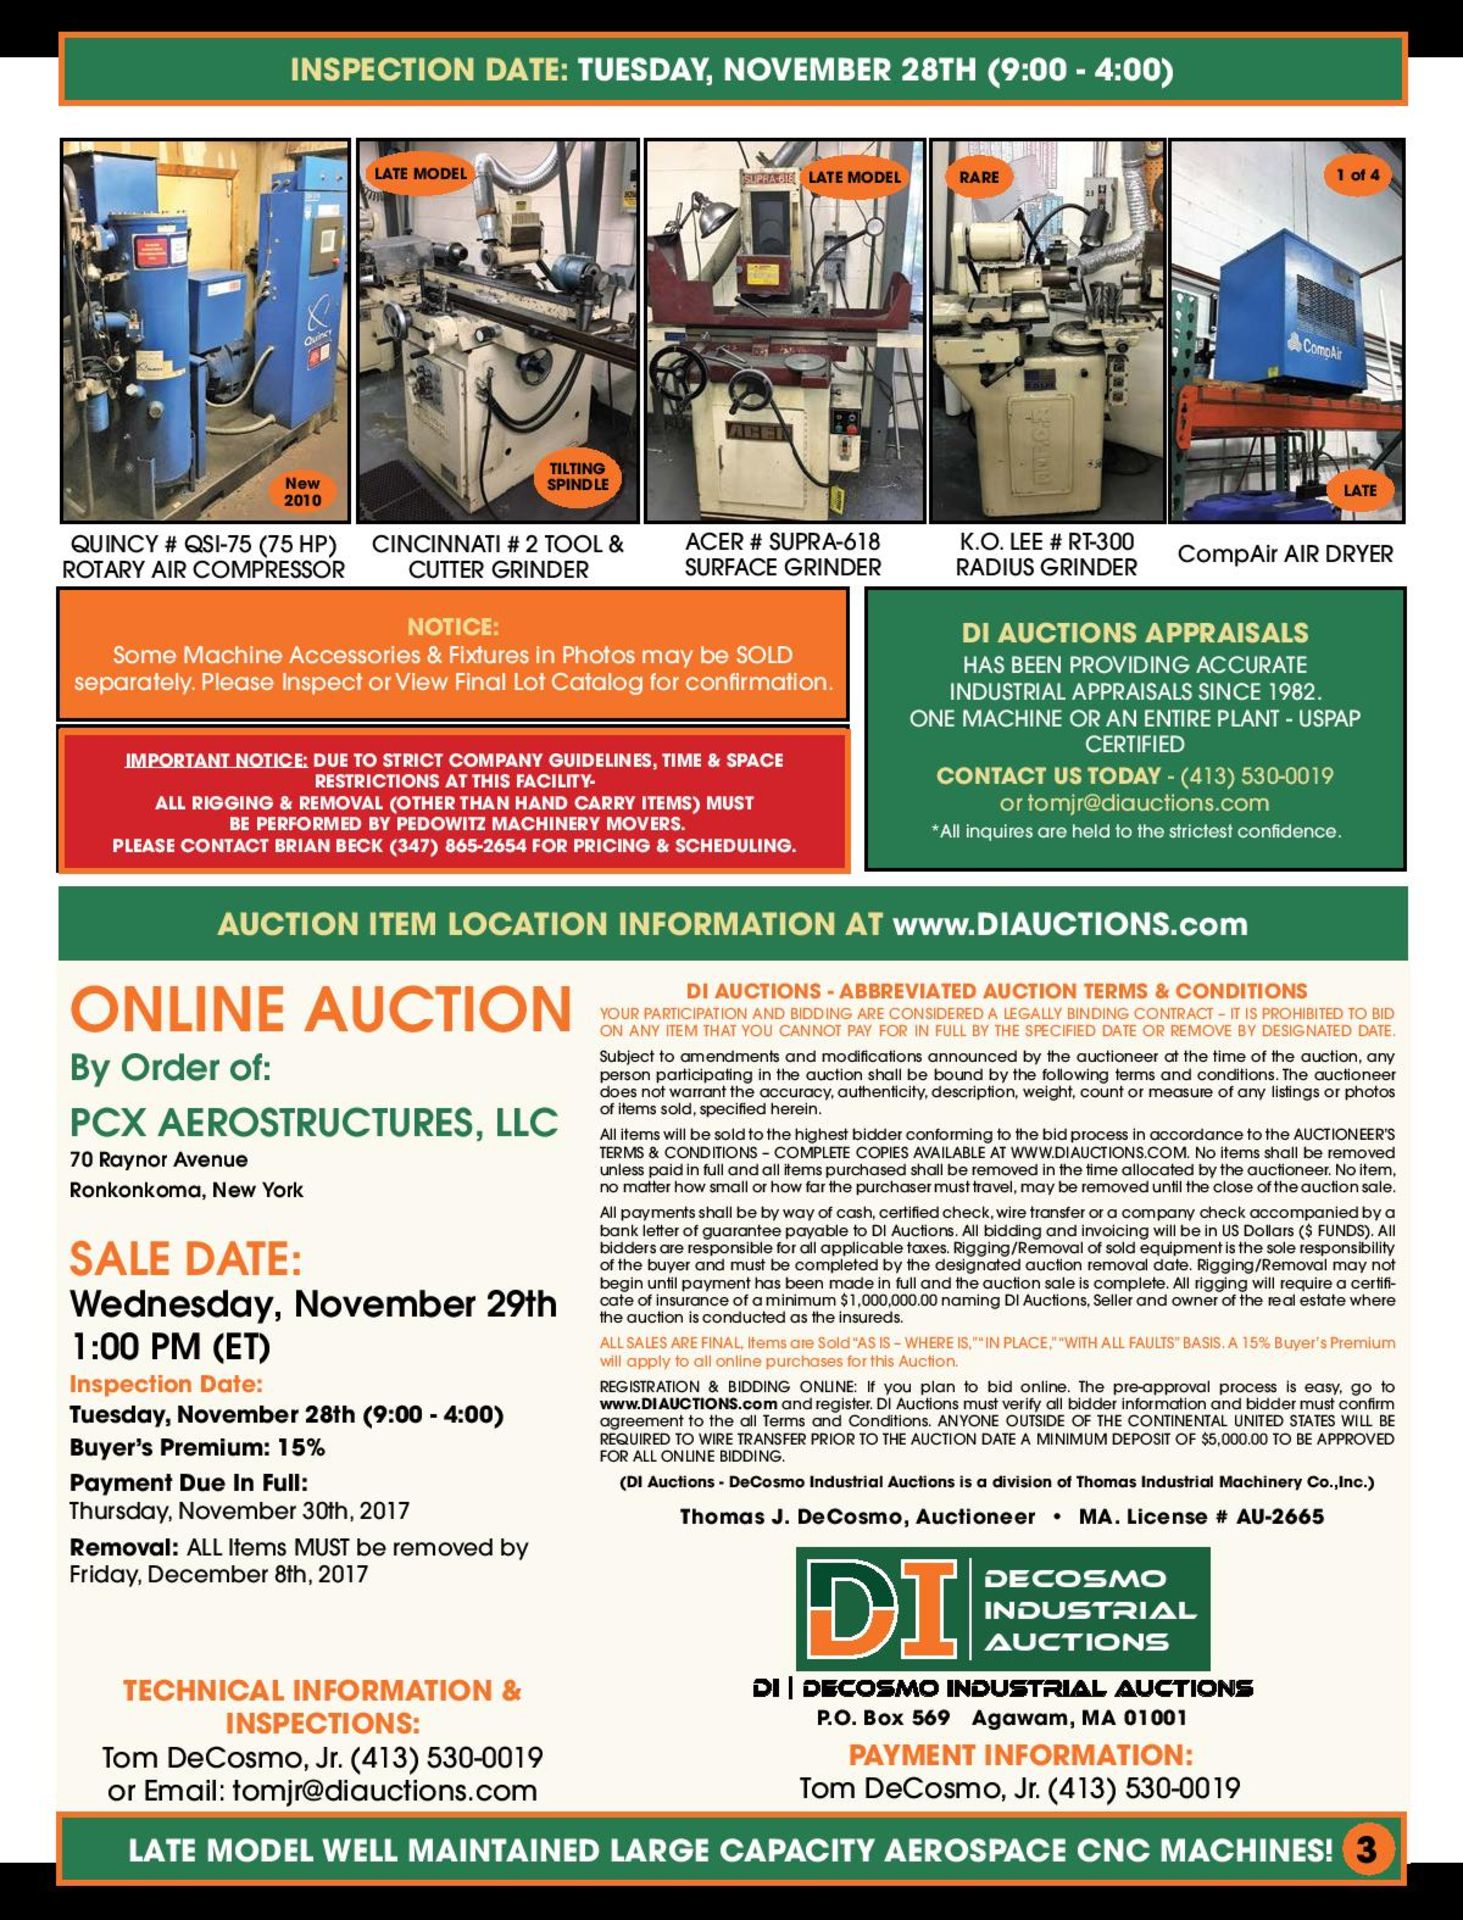 THIS AUCTION IS BEING CONDUCTED ON DeCOSMO INDUSTRIAL AUCTIONS WEBSITE - Image 3 of 4